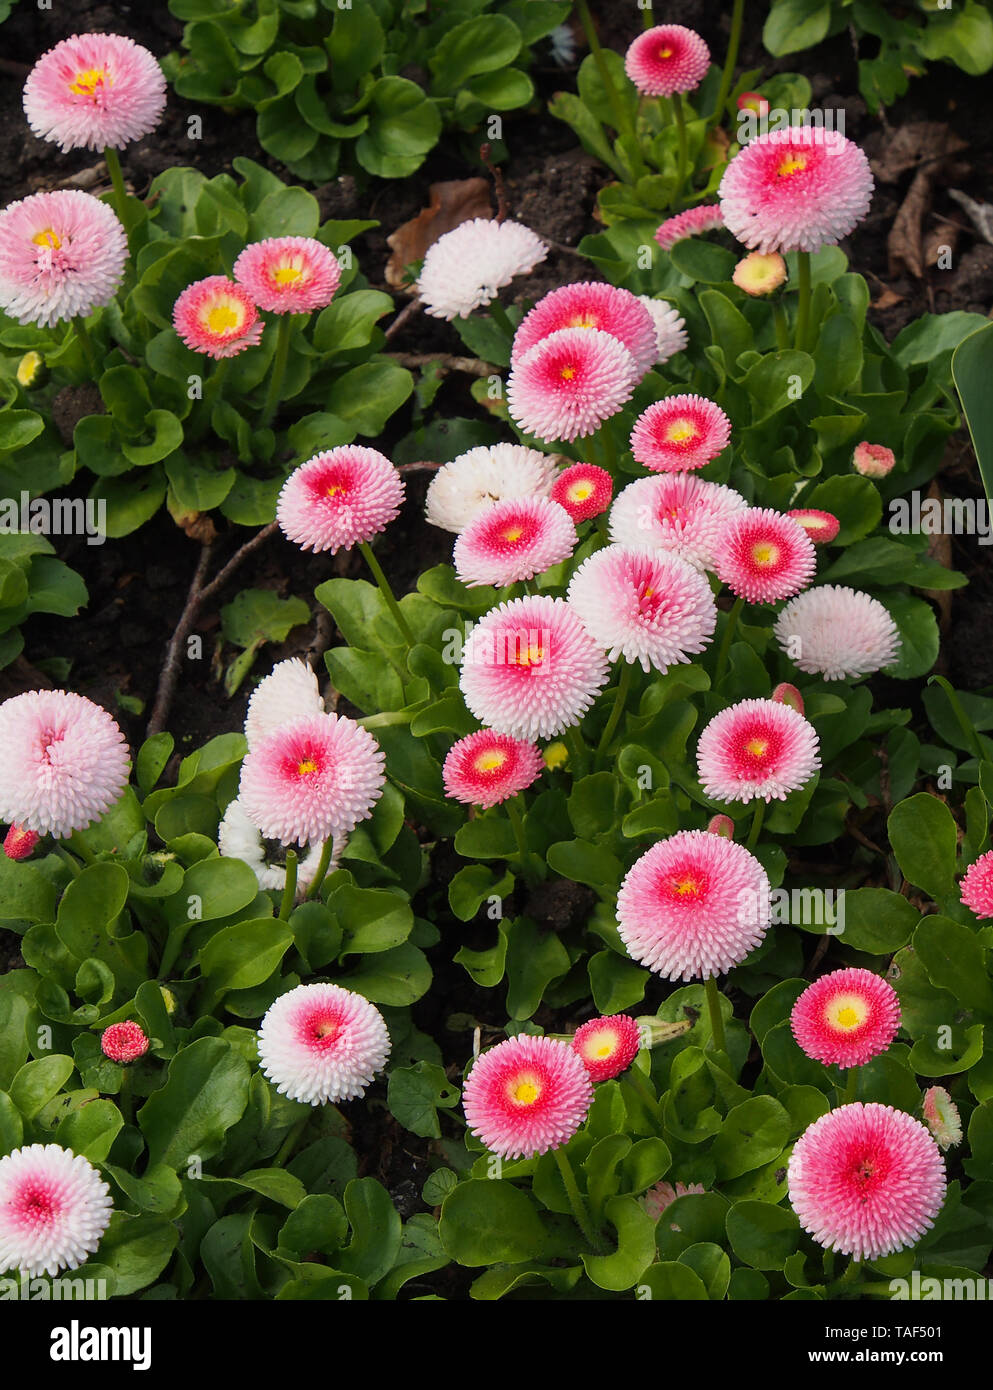 Group of Bellis Perennis Pomponette (bellis daisies) cultivar of the English daisy. Stock Photo